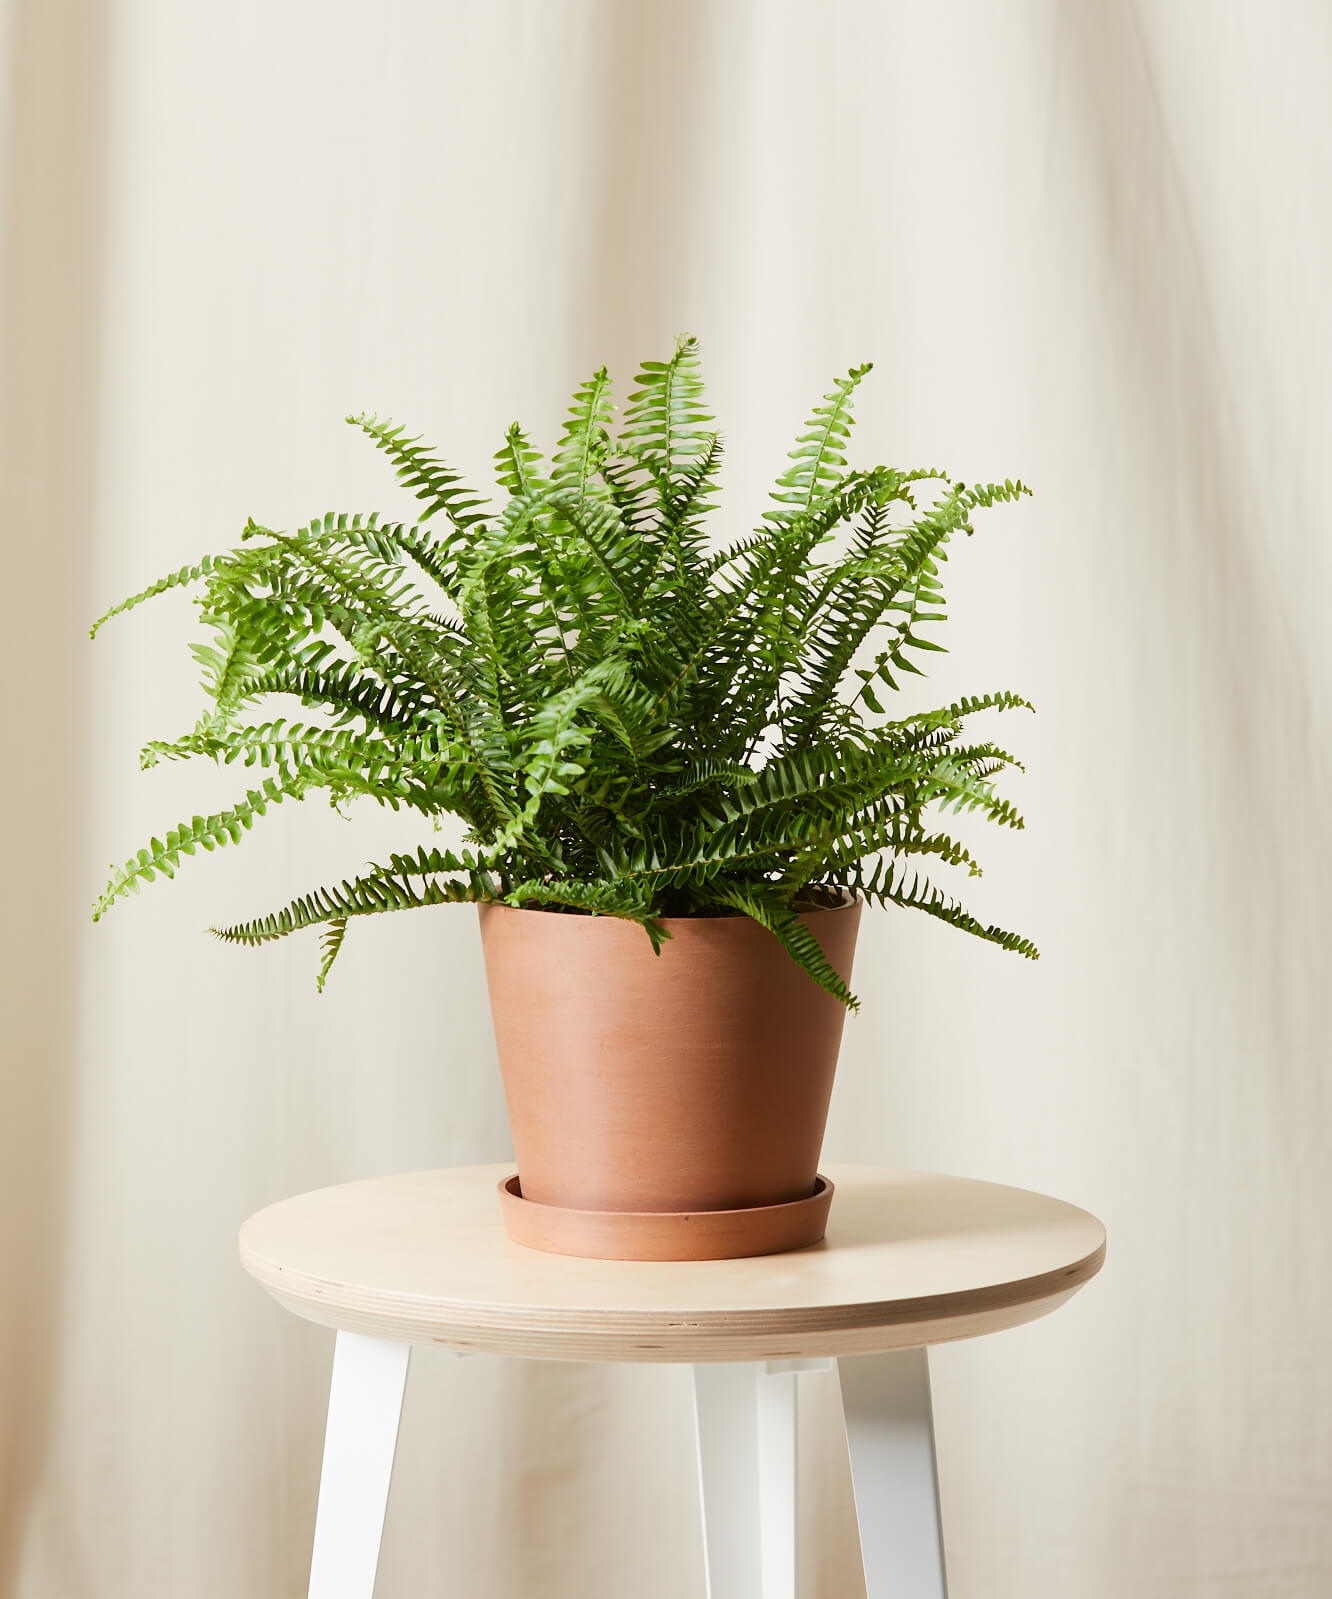 Kimberly queen fern - Clay - Image 0